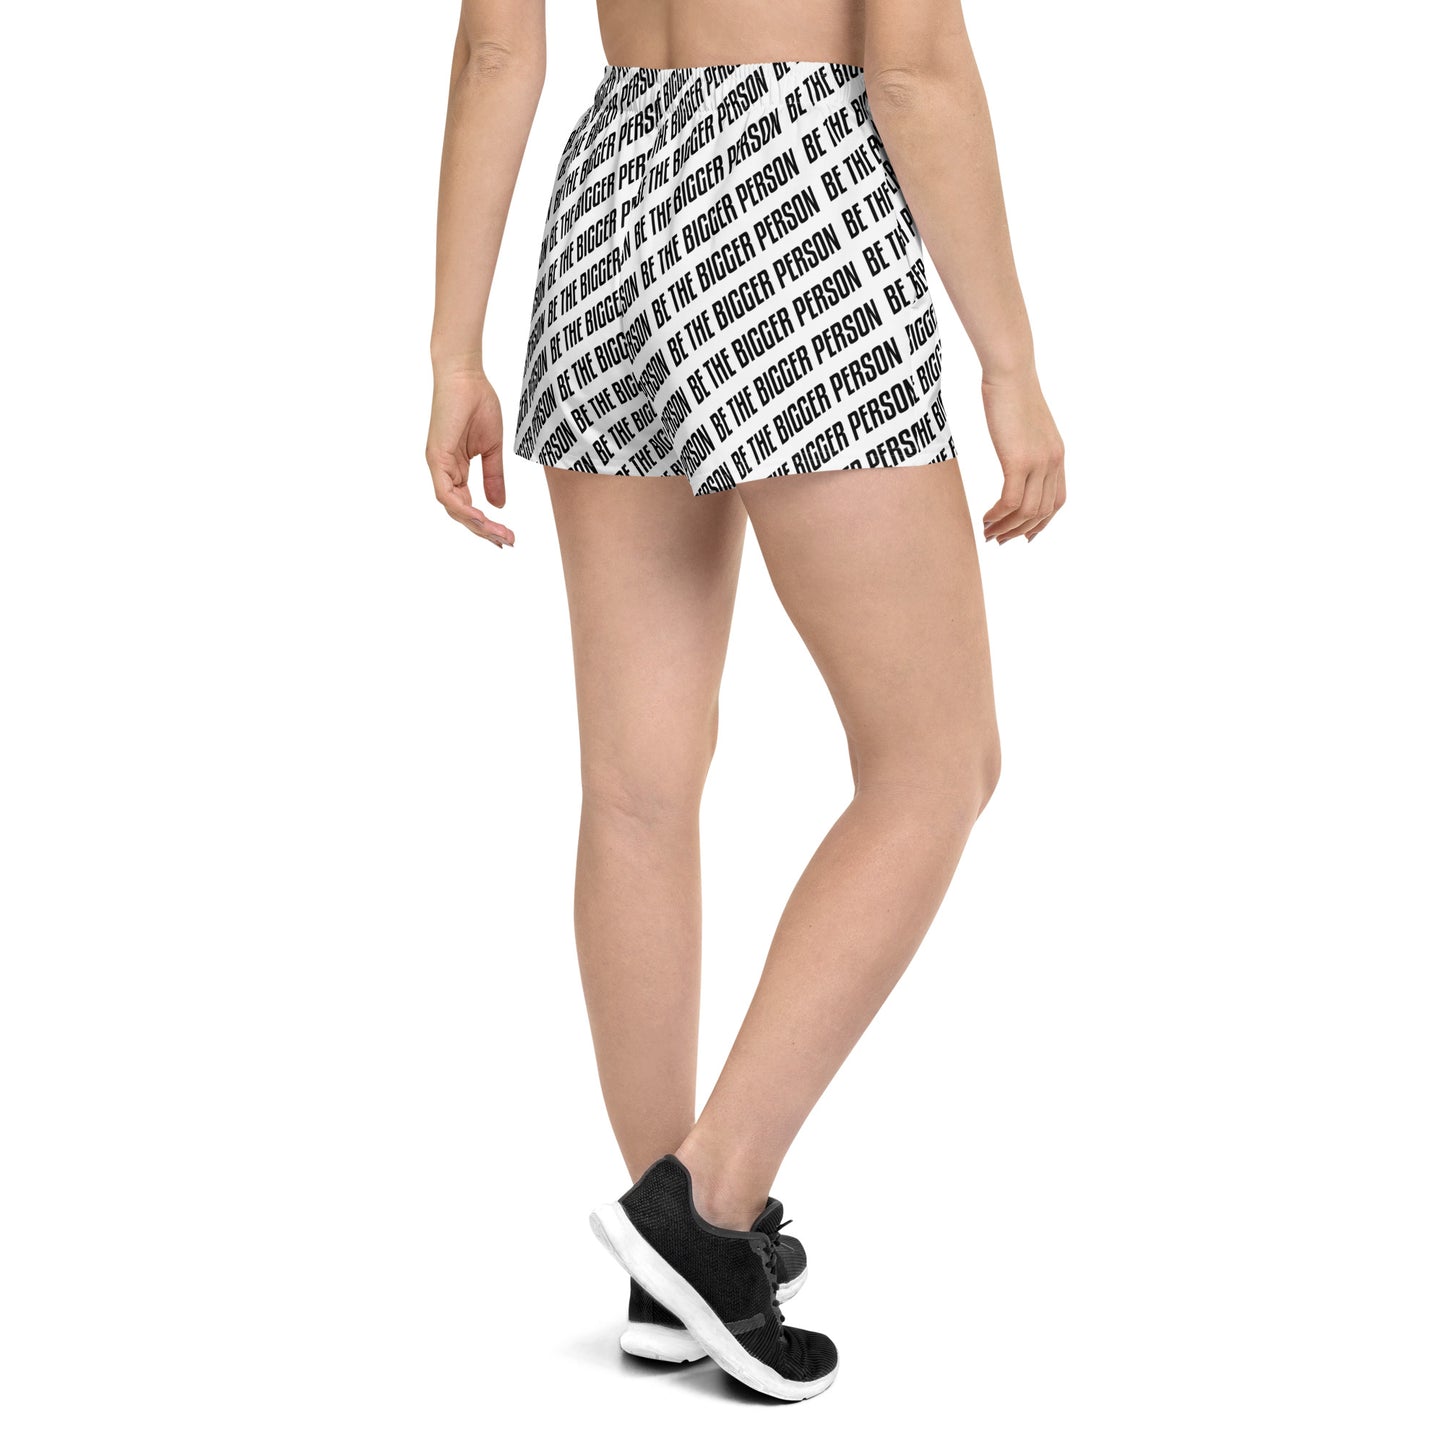 LOCKED UP - Women’s Recycled Athletic Shorts